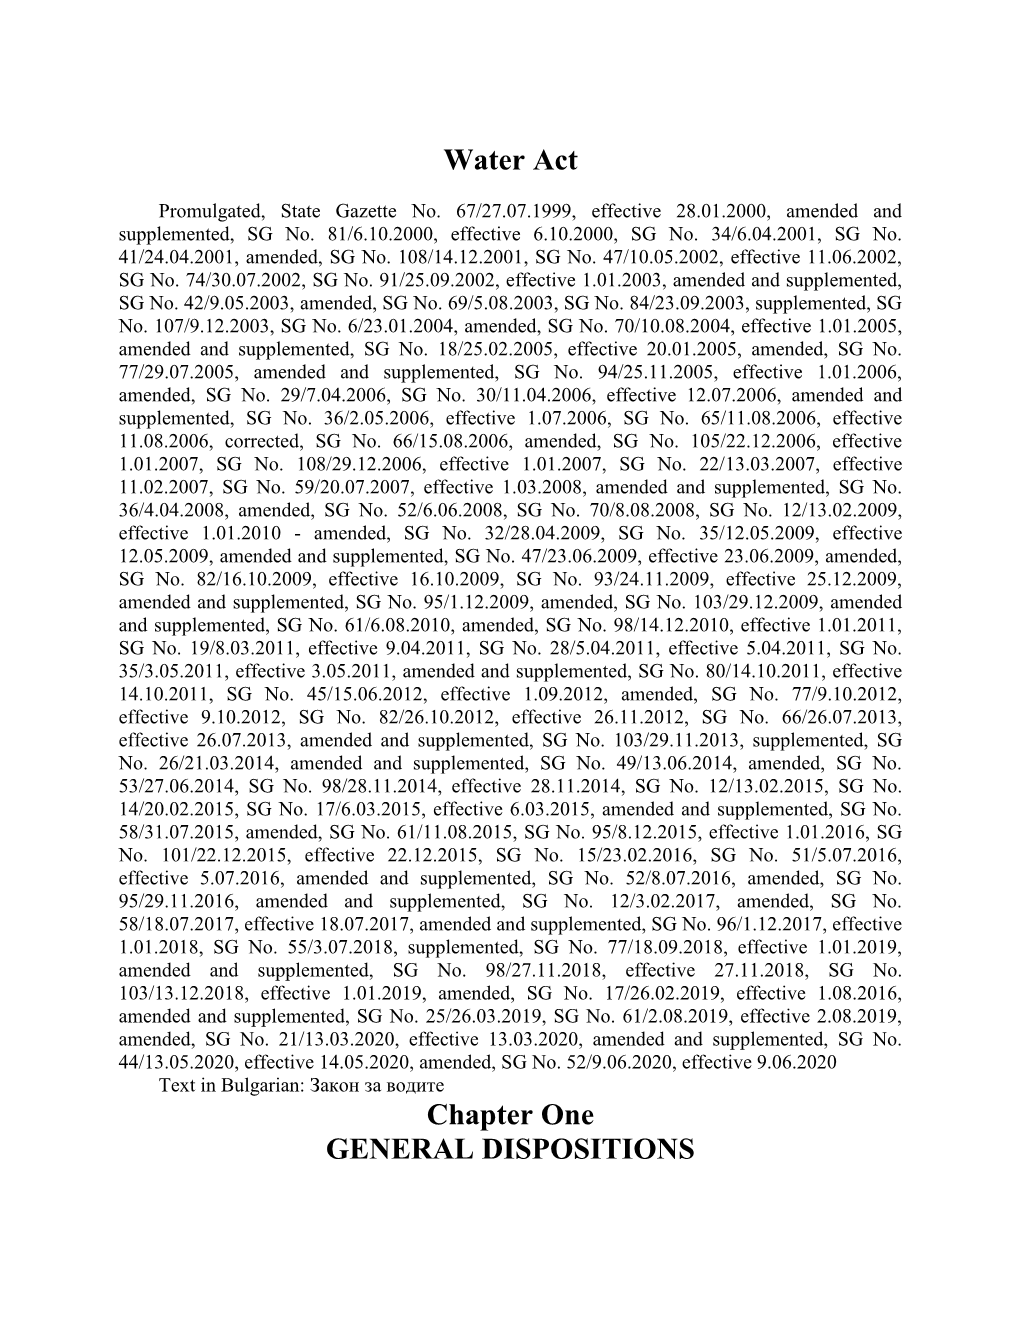 Water Act Chapter One GENERAL DISPOSITIONS